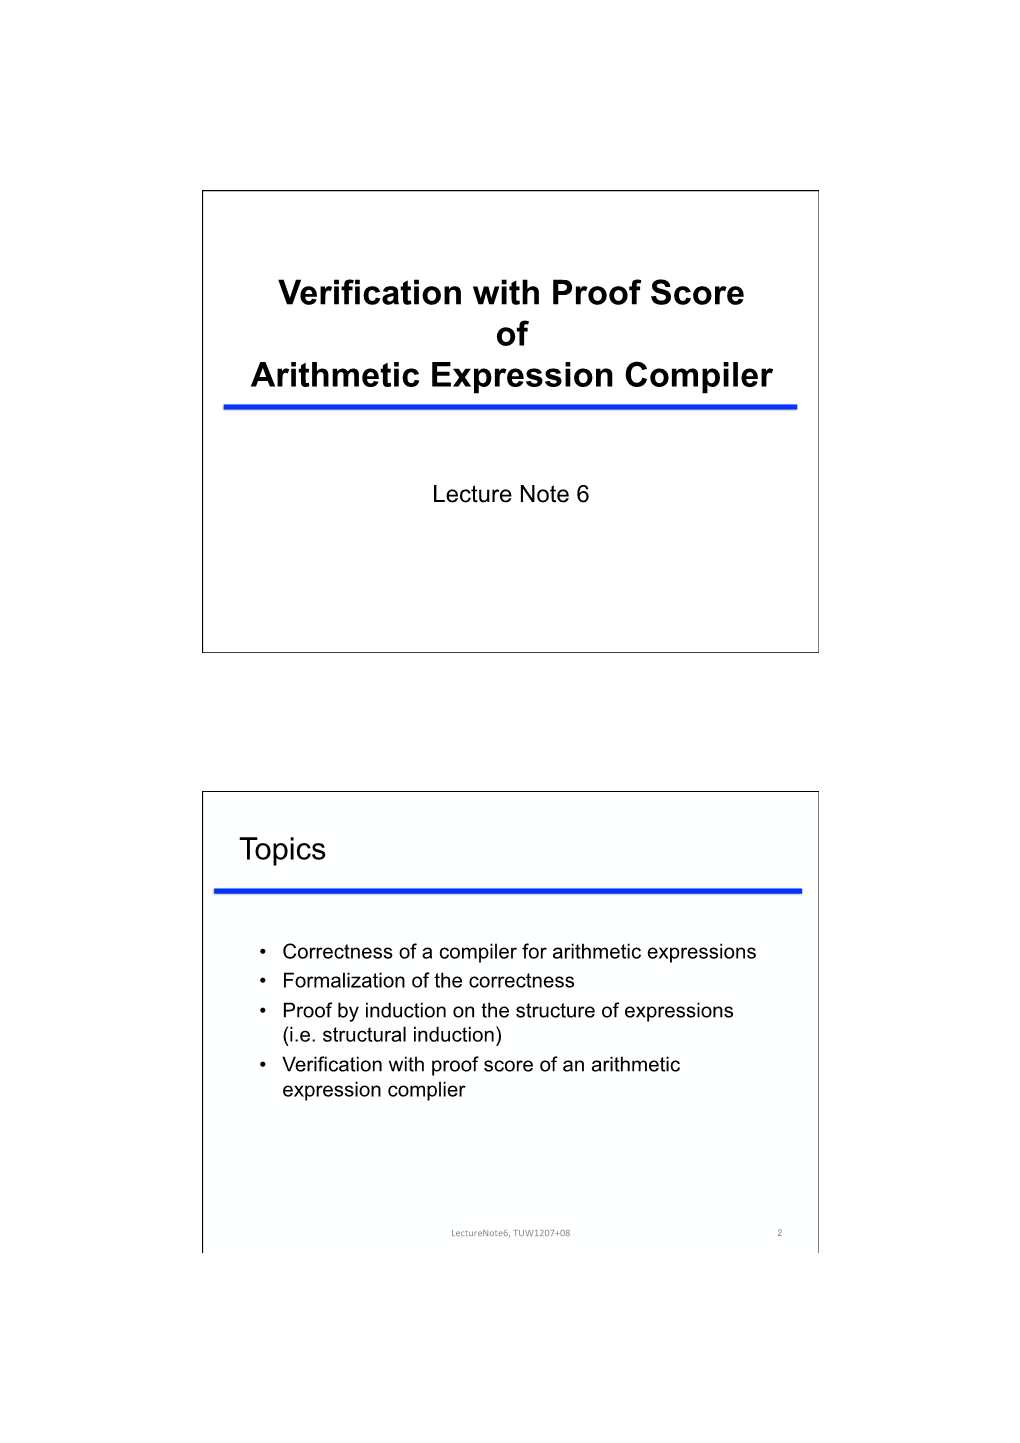 Verification with Proof Score of Arithmetic Expression Compiler